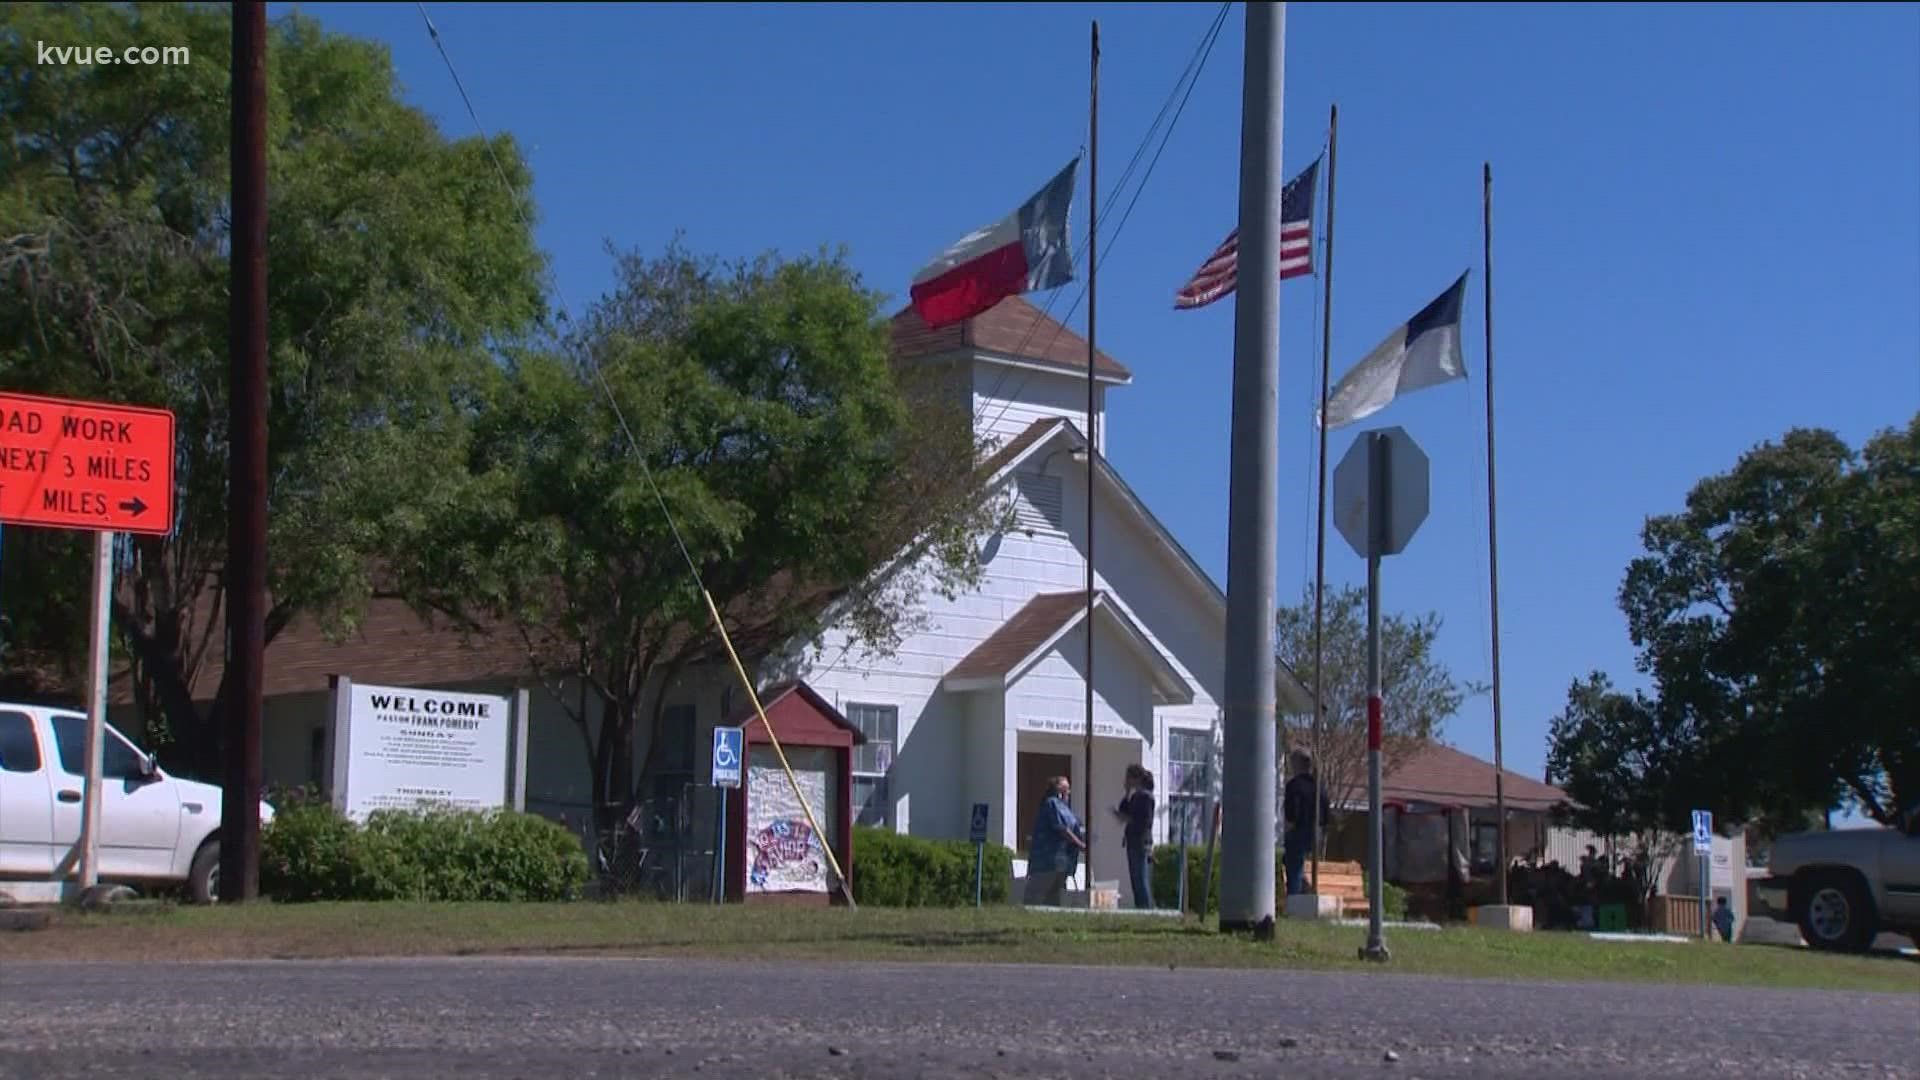 The U.S. Air Force must pay more than $230 million following the deadly mass shooting that killed 26 people at a Sutherland Springs church in 2017.